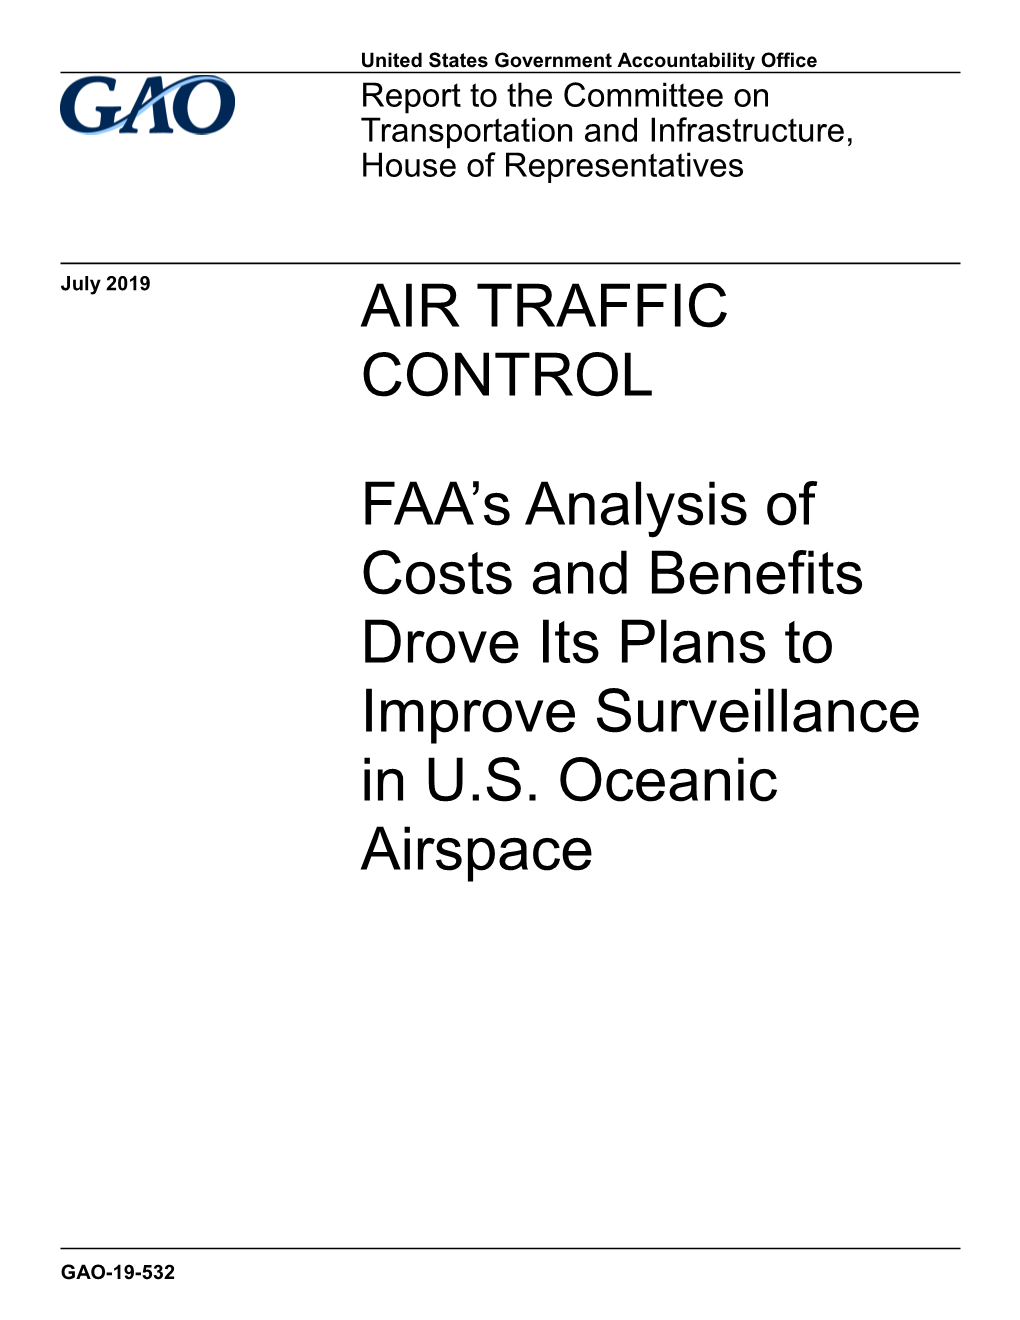 GAO-19-532, AIR TRAFFIC CONTROL: FAA's Analysis of Costs